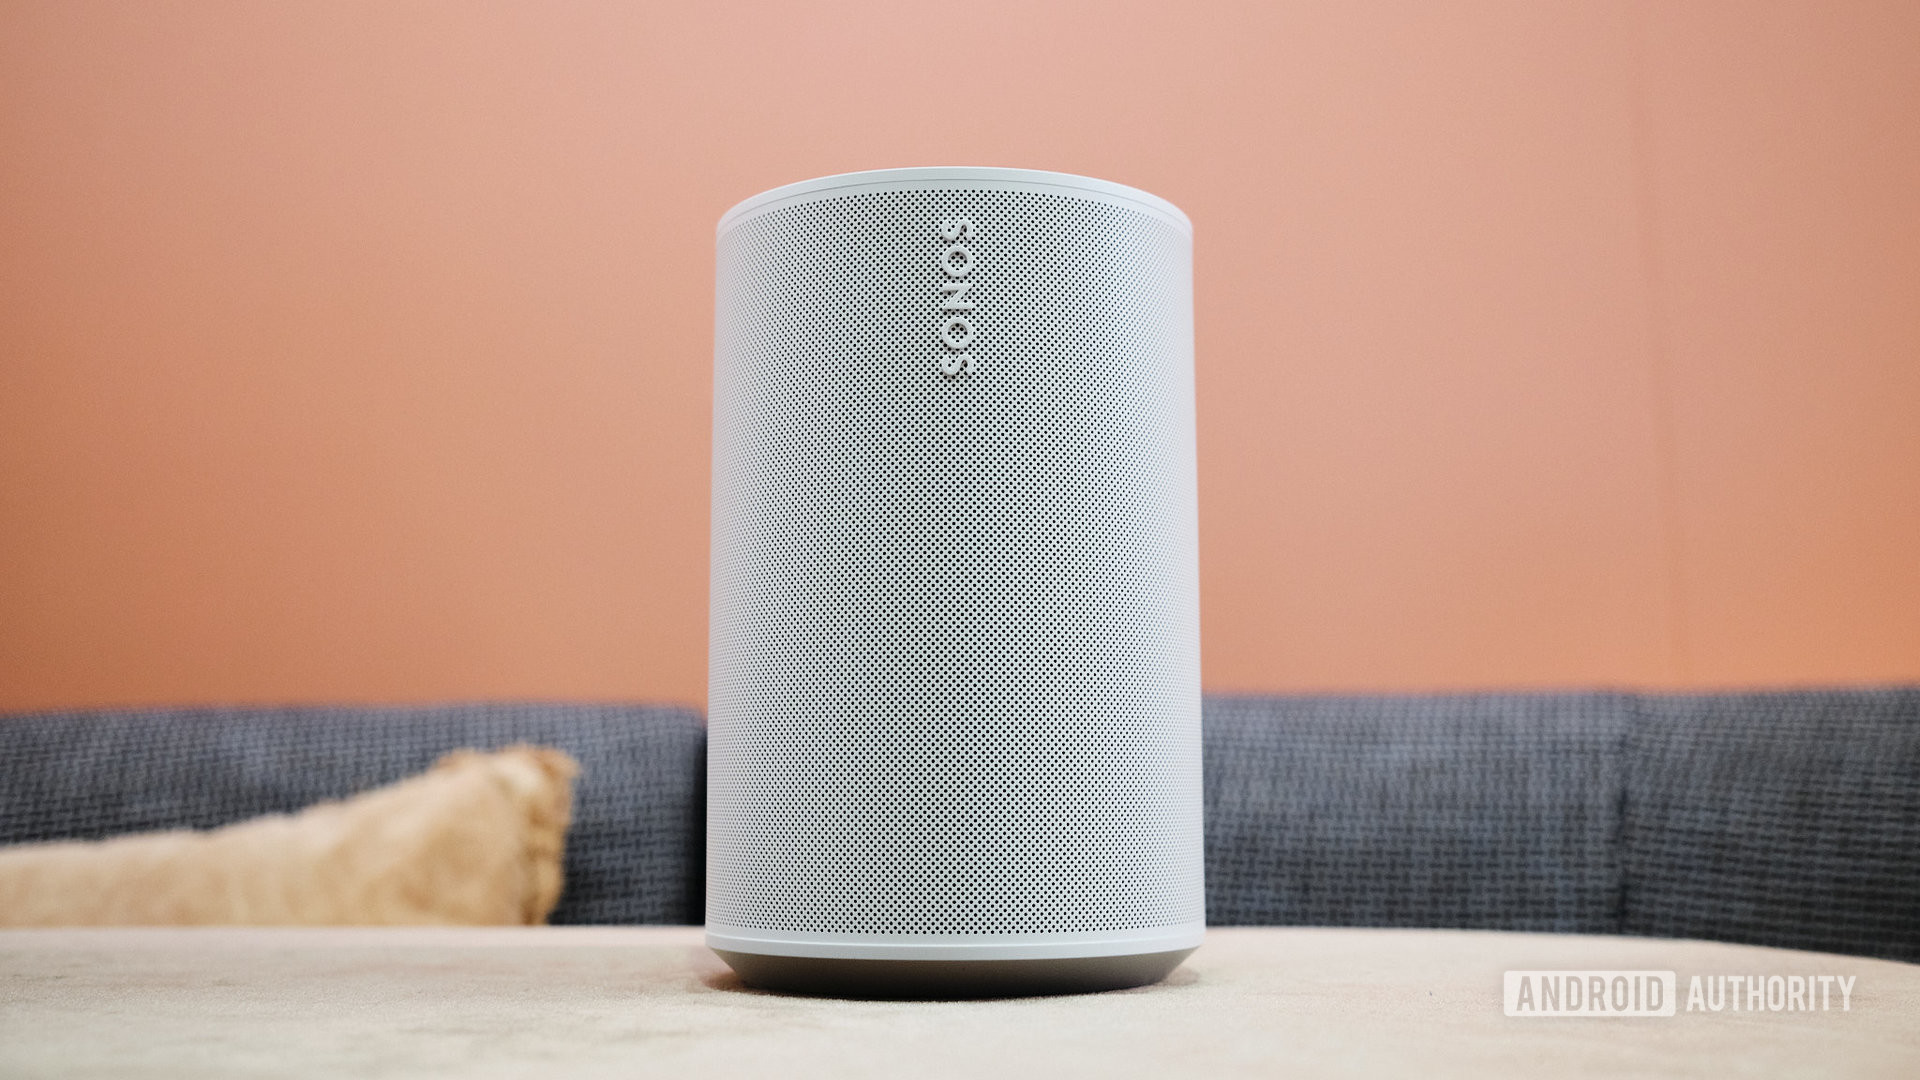 The Sonos Era 100 smart speaker on a table in front of an orange wall.